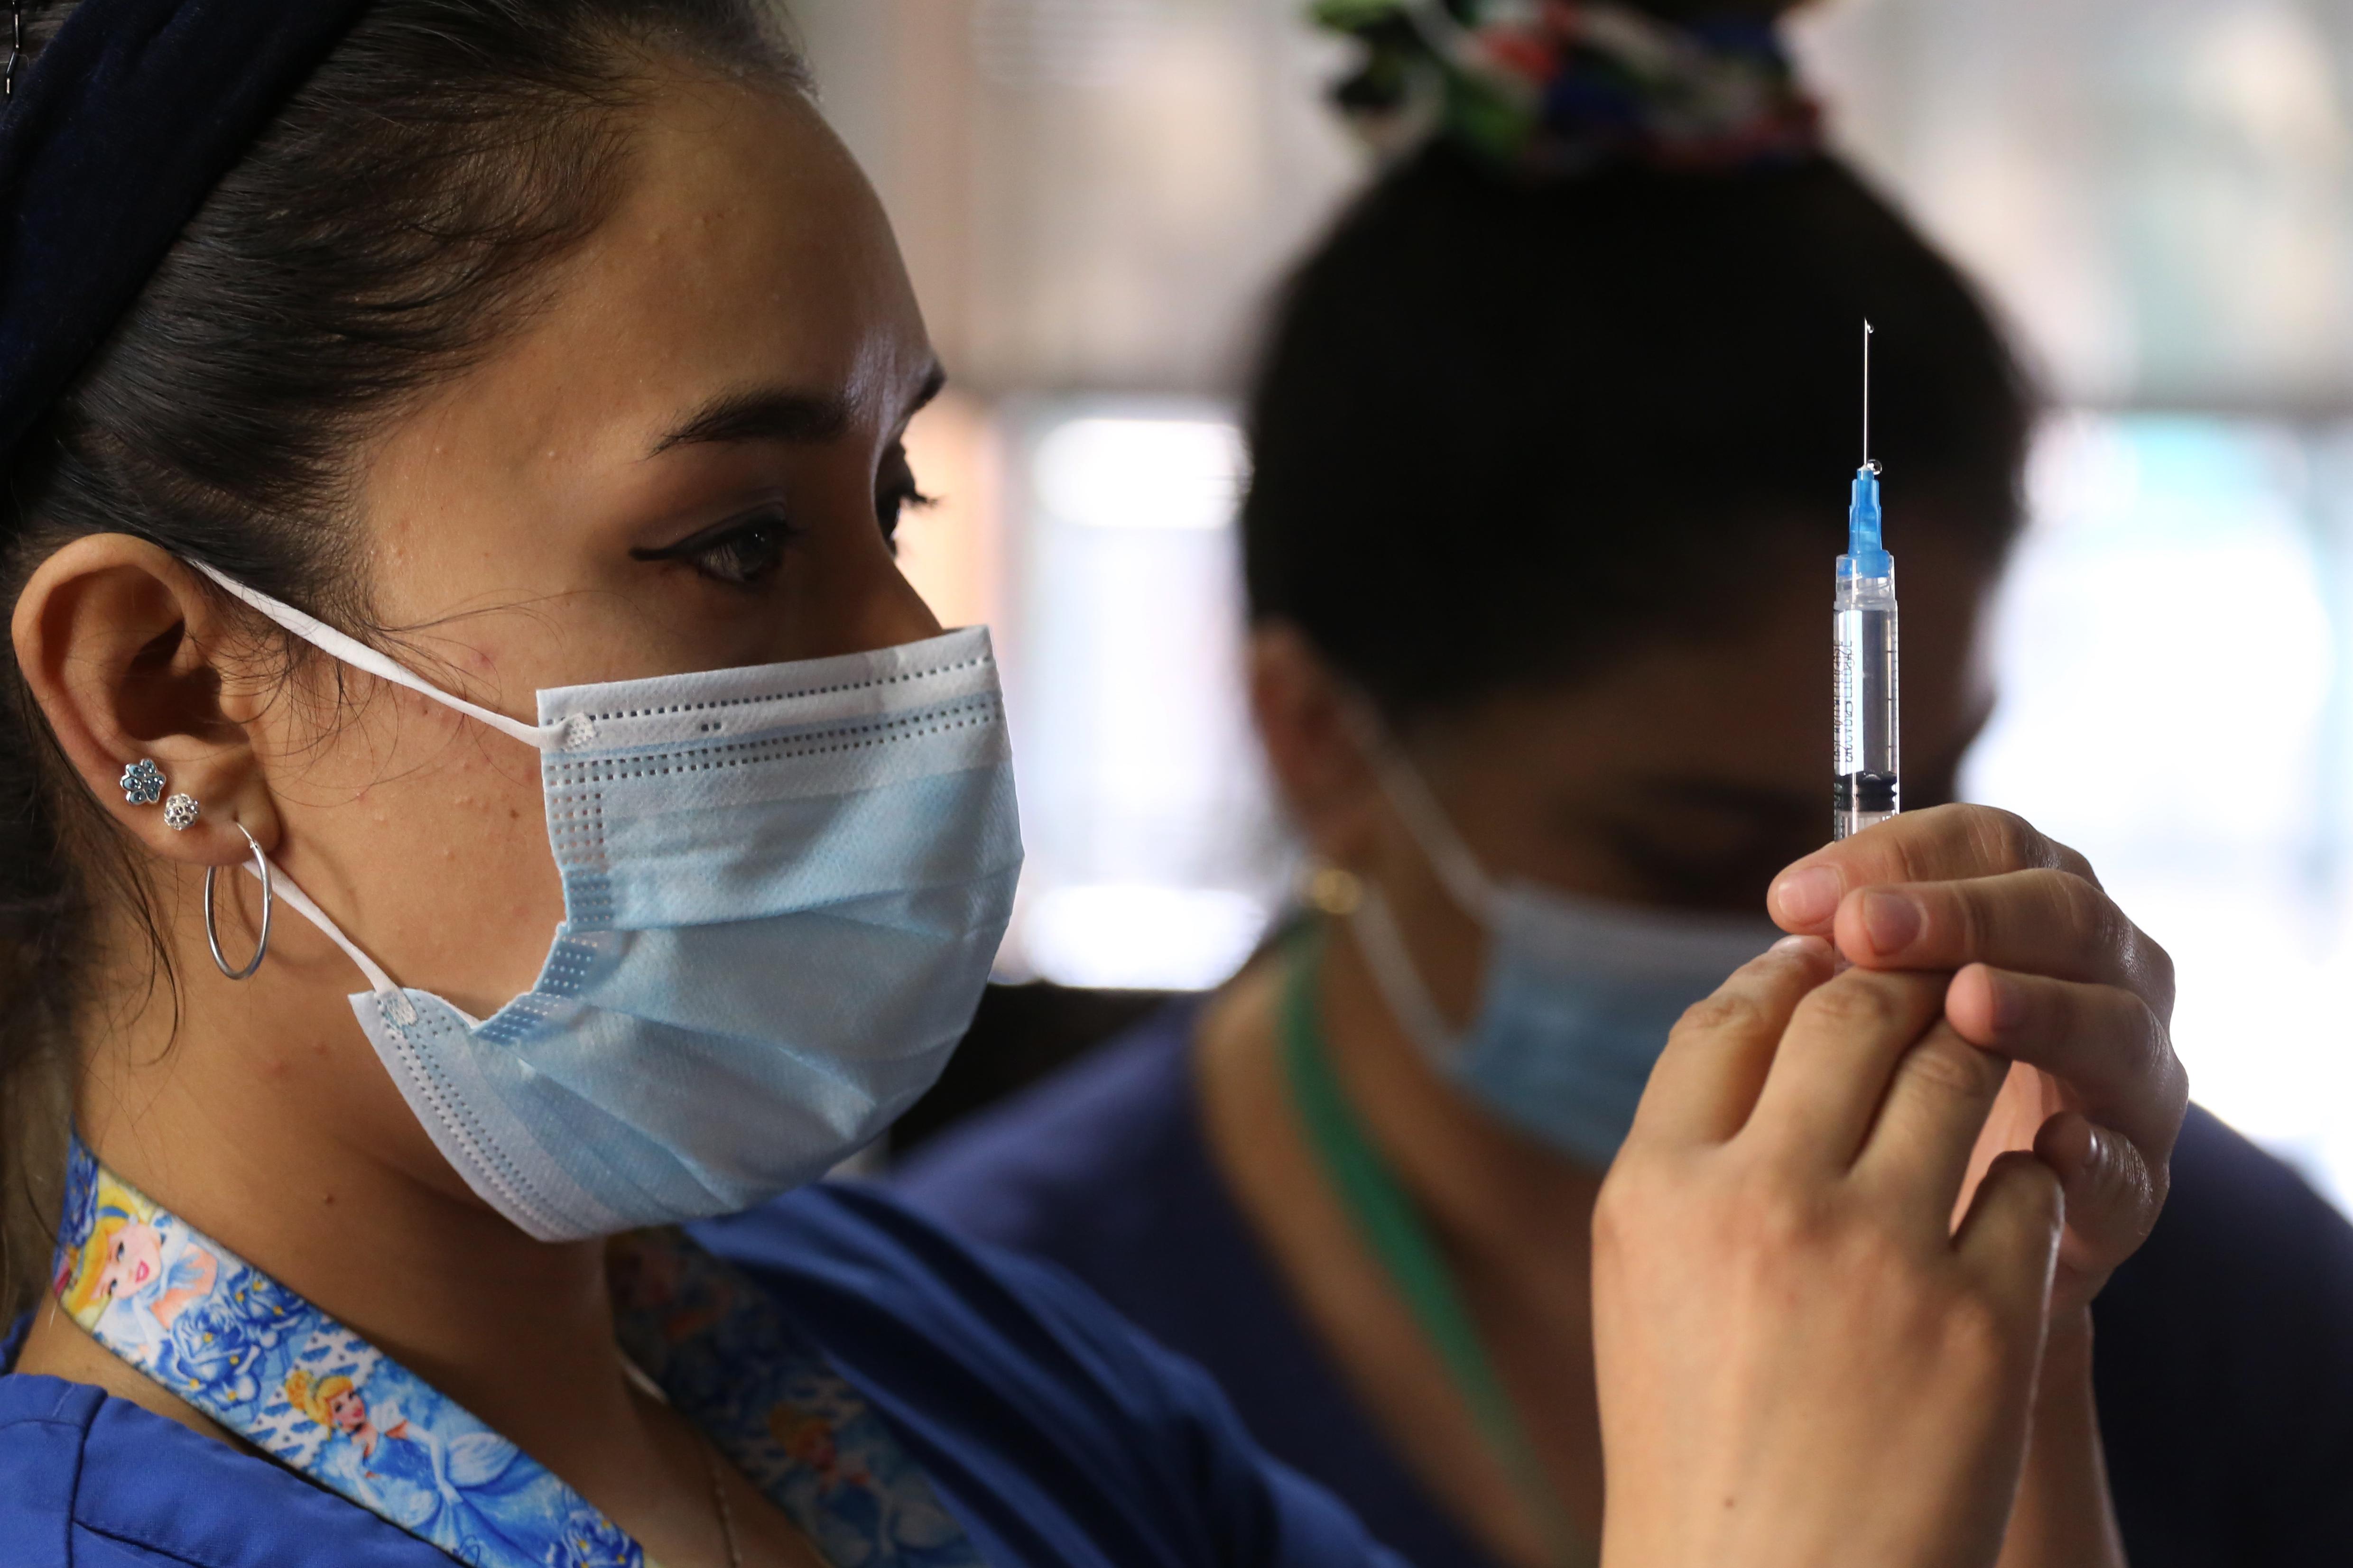 On 23 February in Santiago Chile, a health worker prepares a syringe filled with a dose of vaccine against COVID-19 during a campaign to vaccinate teachers. Photo: UNICEF/UN0429453/González